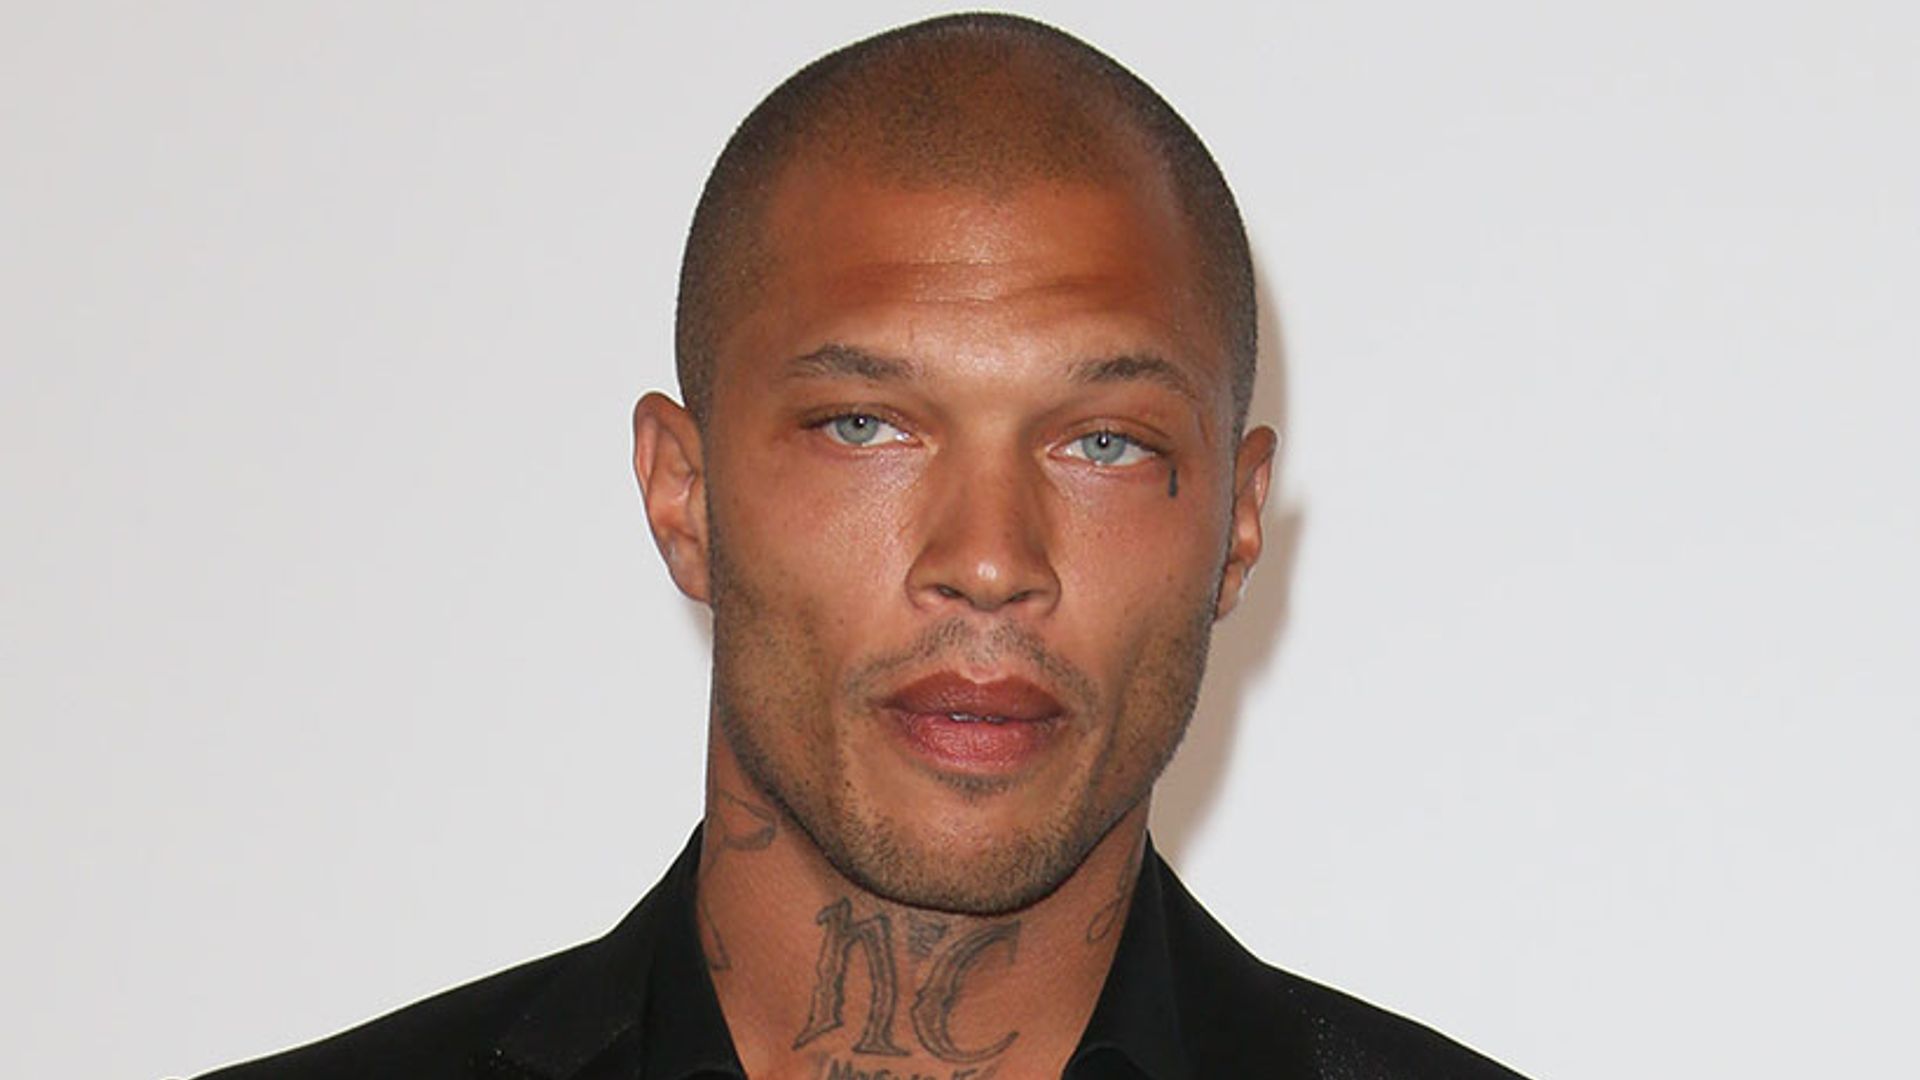 Jeremy Meeks files for separation from wife after being pictured with Chloe Green